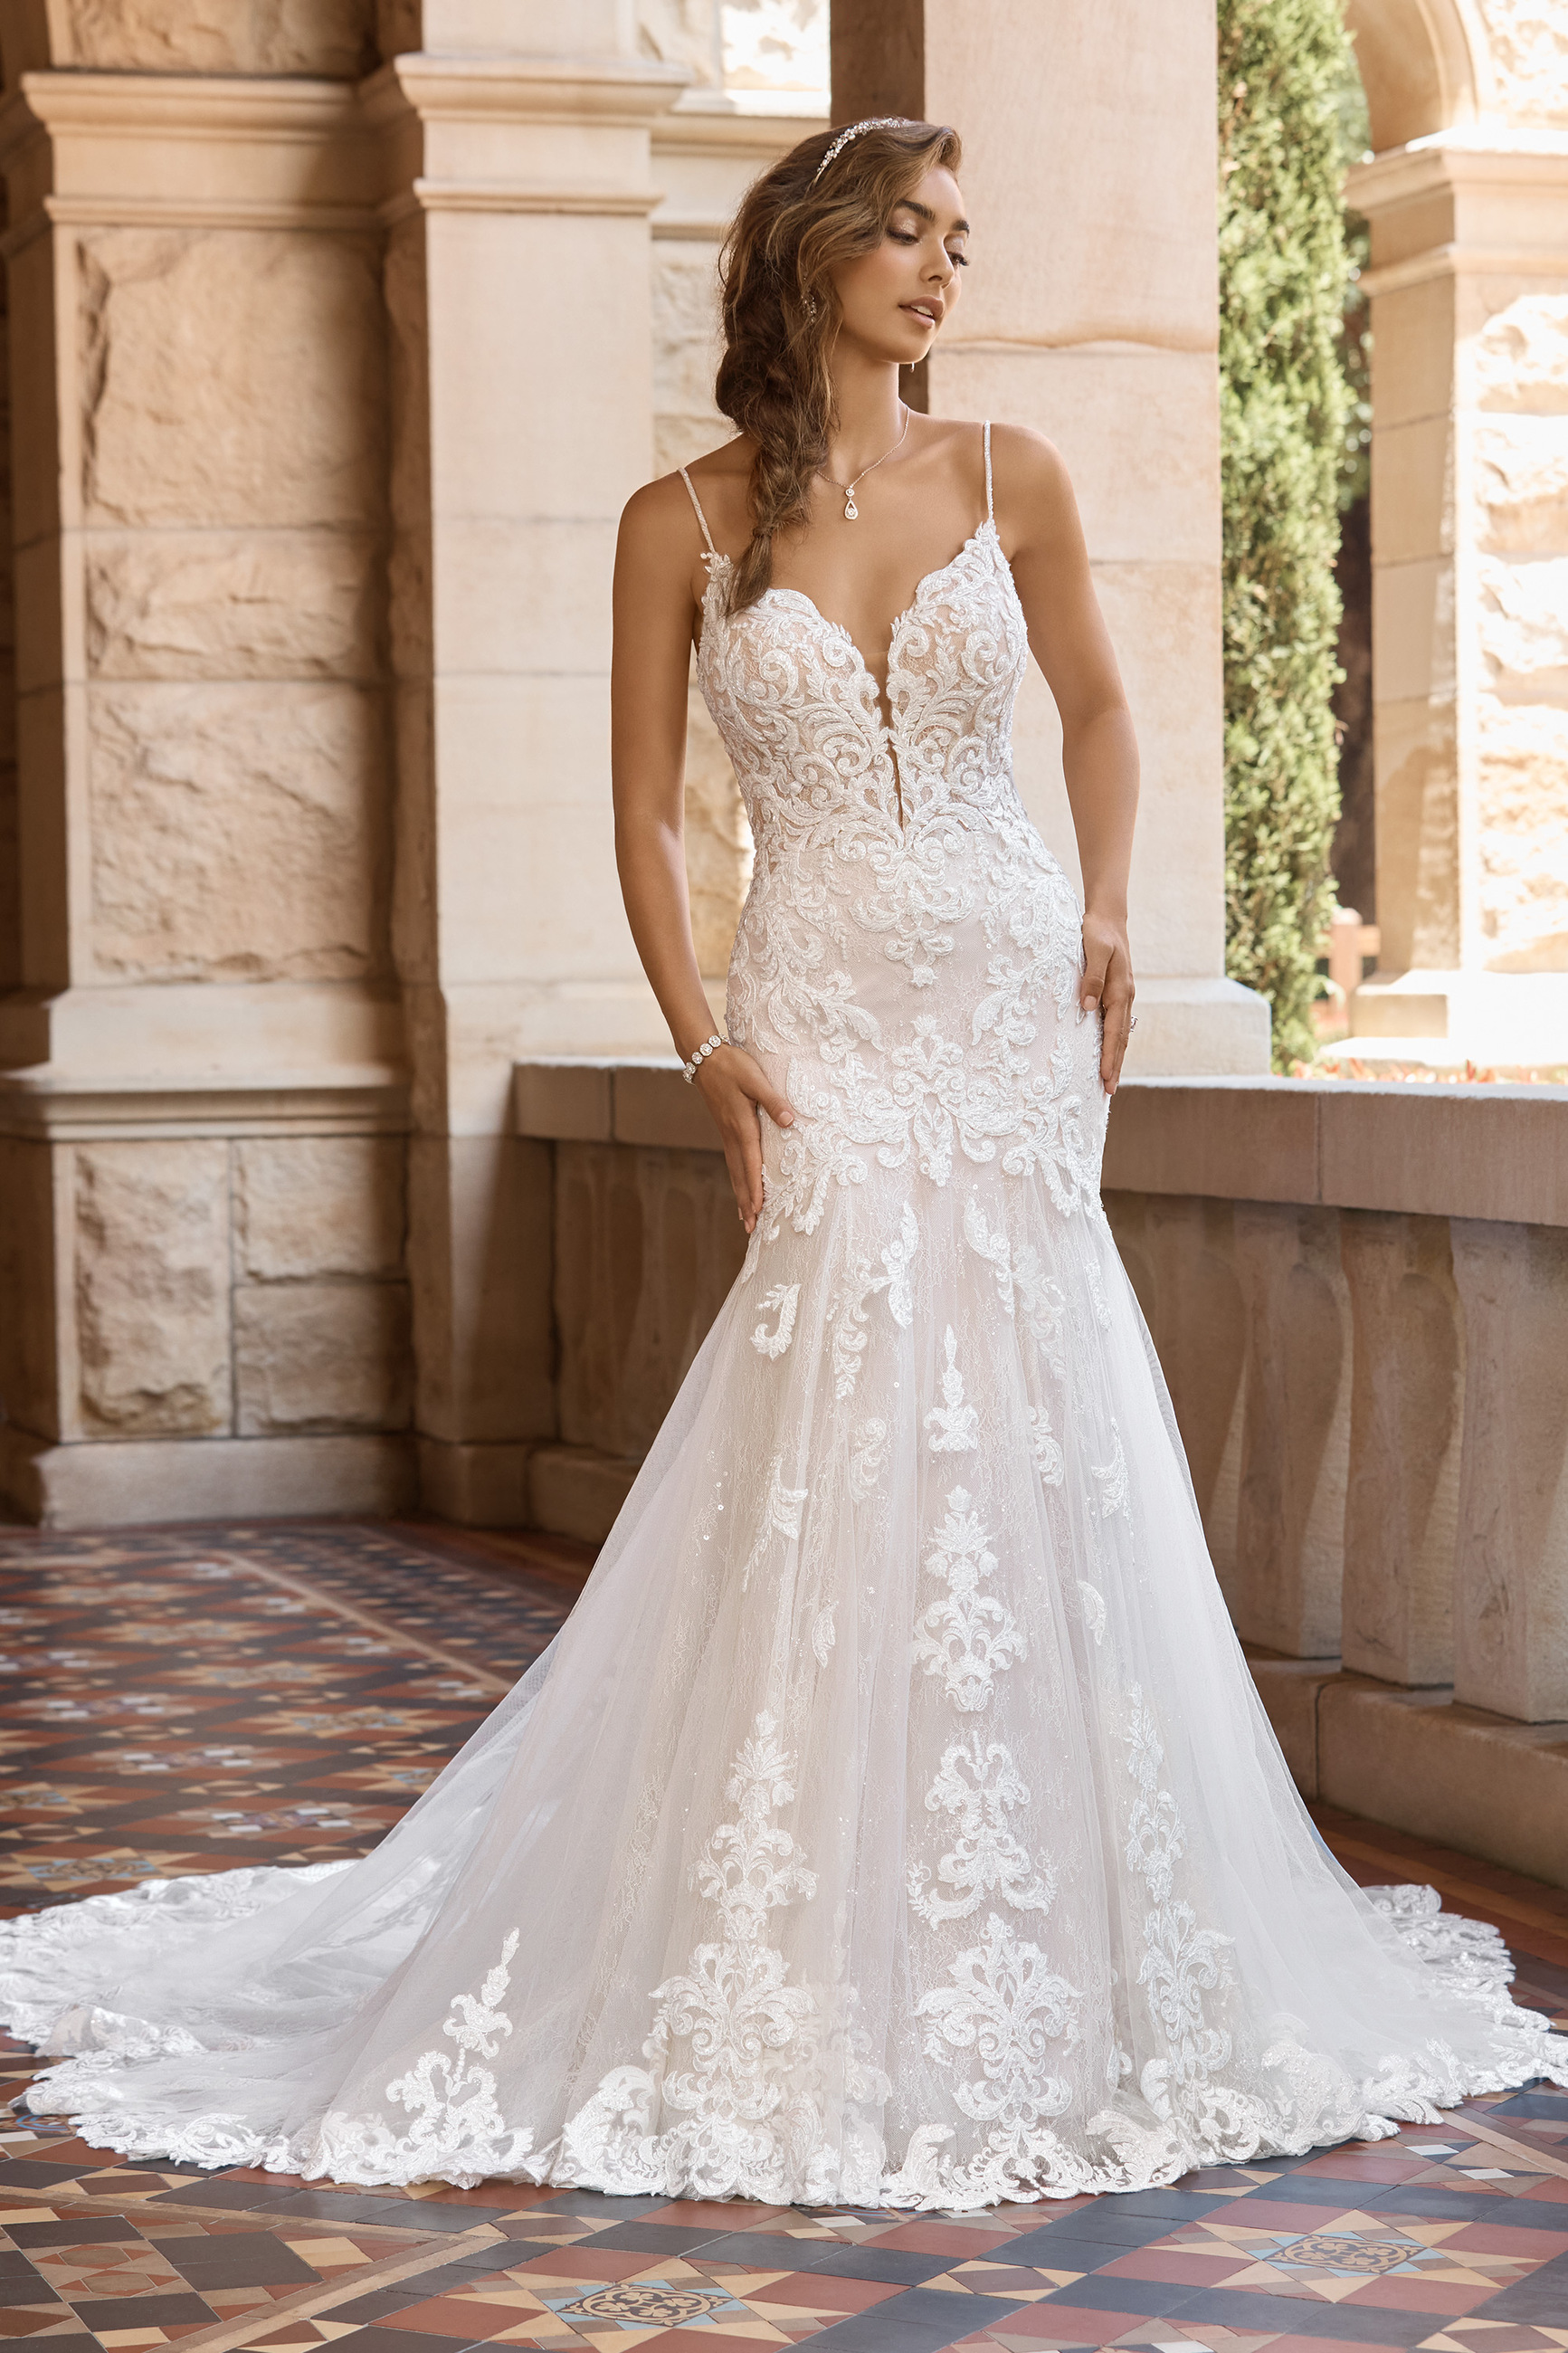 Sophisticated Wedding Dress with Hand-Sewn Lace